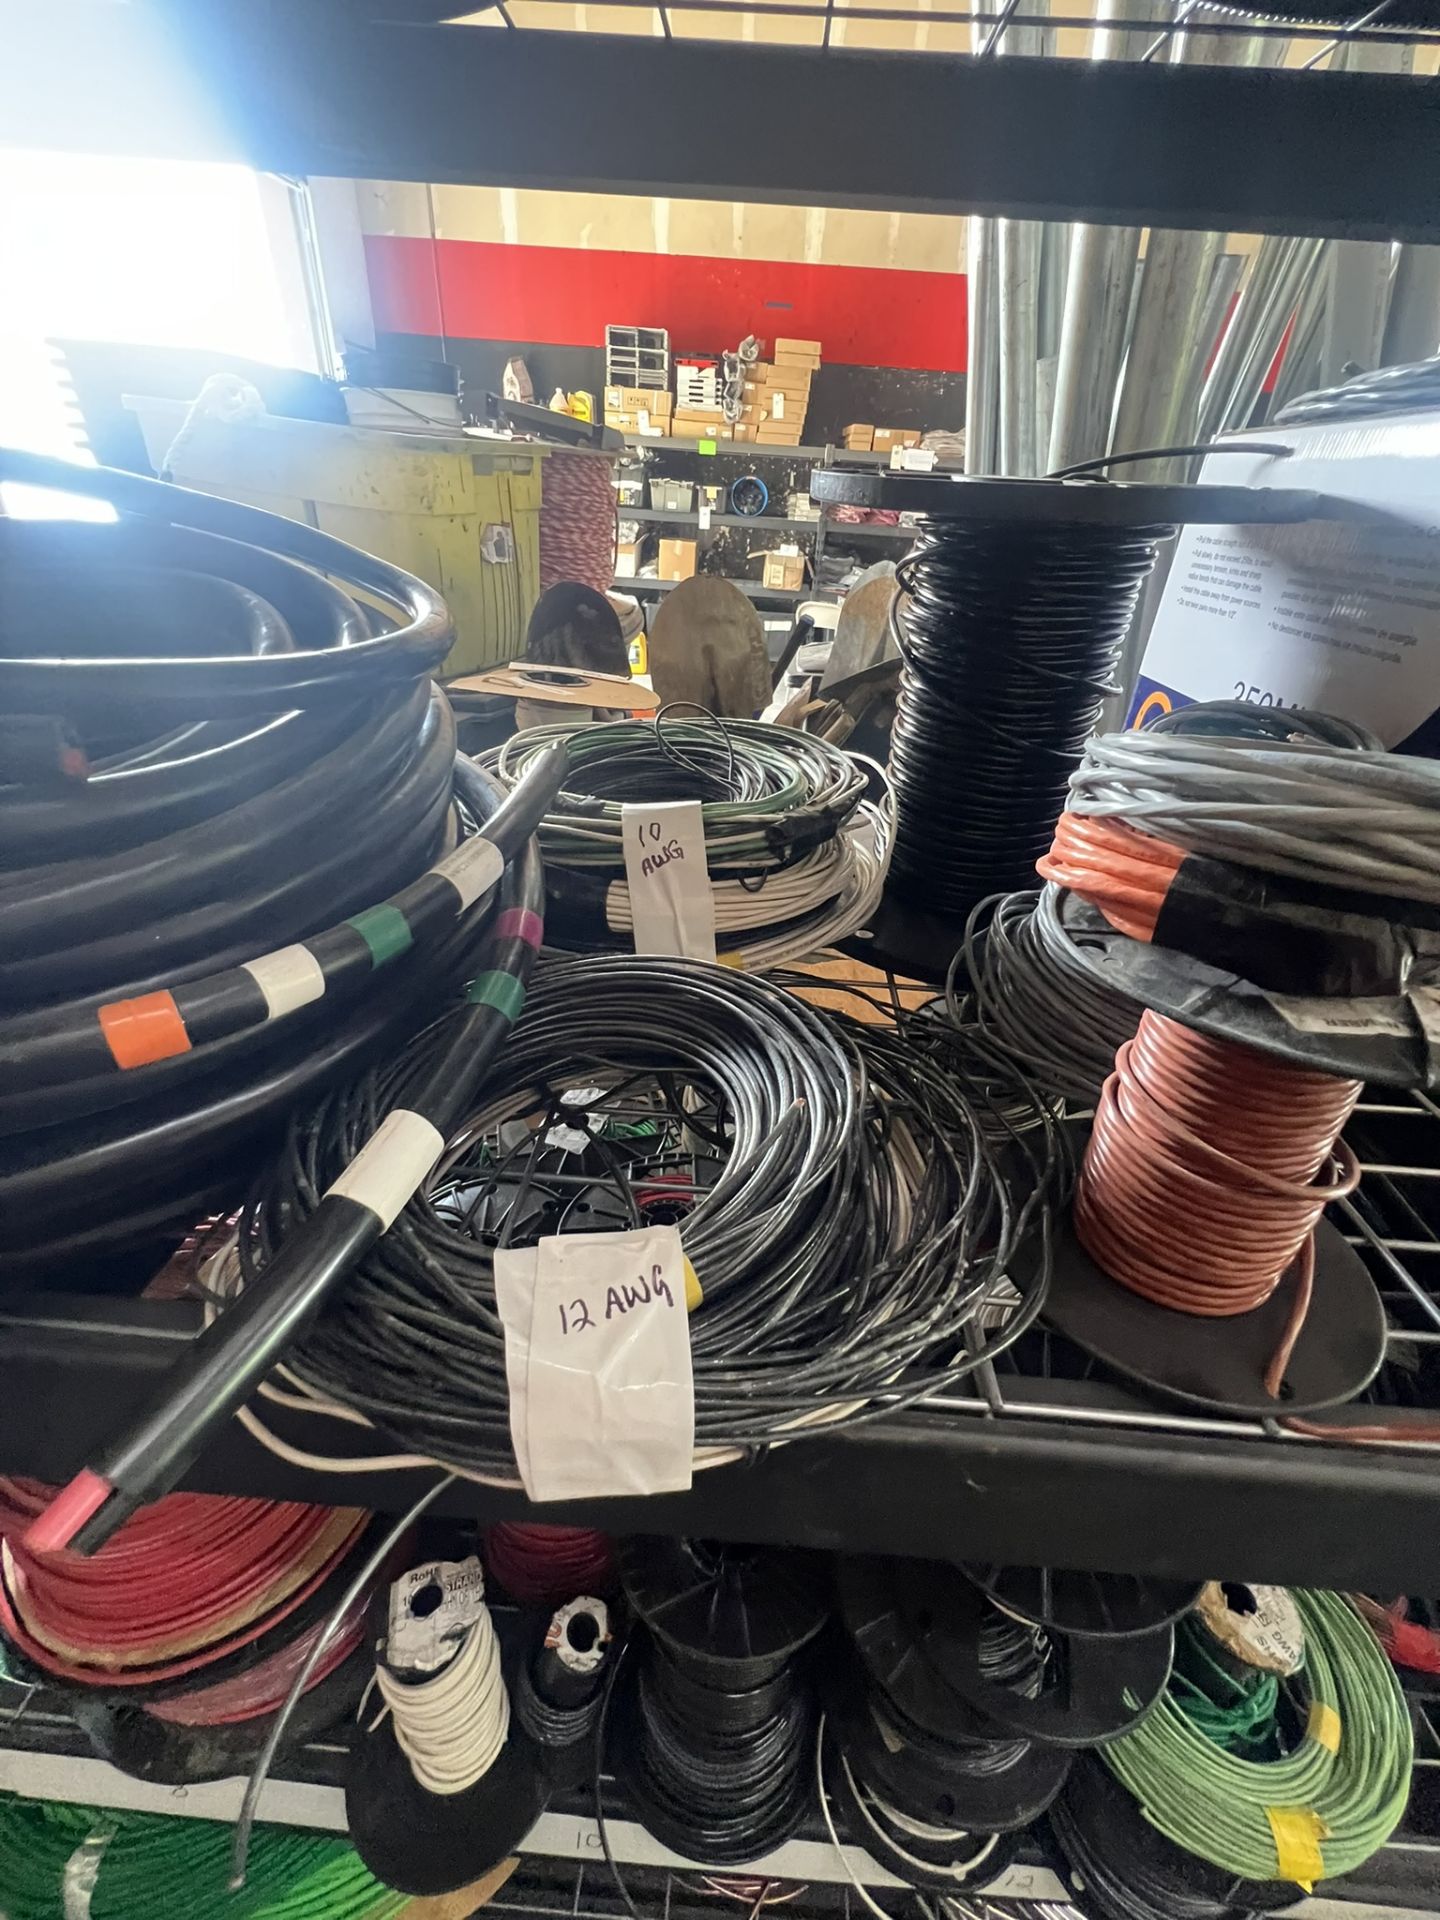 3 Shelves of Wire Spools, Power Cable EP39-02547b, 12AWG, CAT 5, and 10 gauge wire, some copper - Image 4 of 4